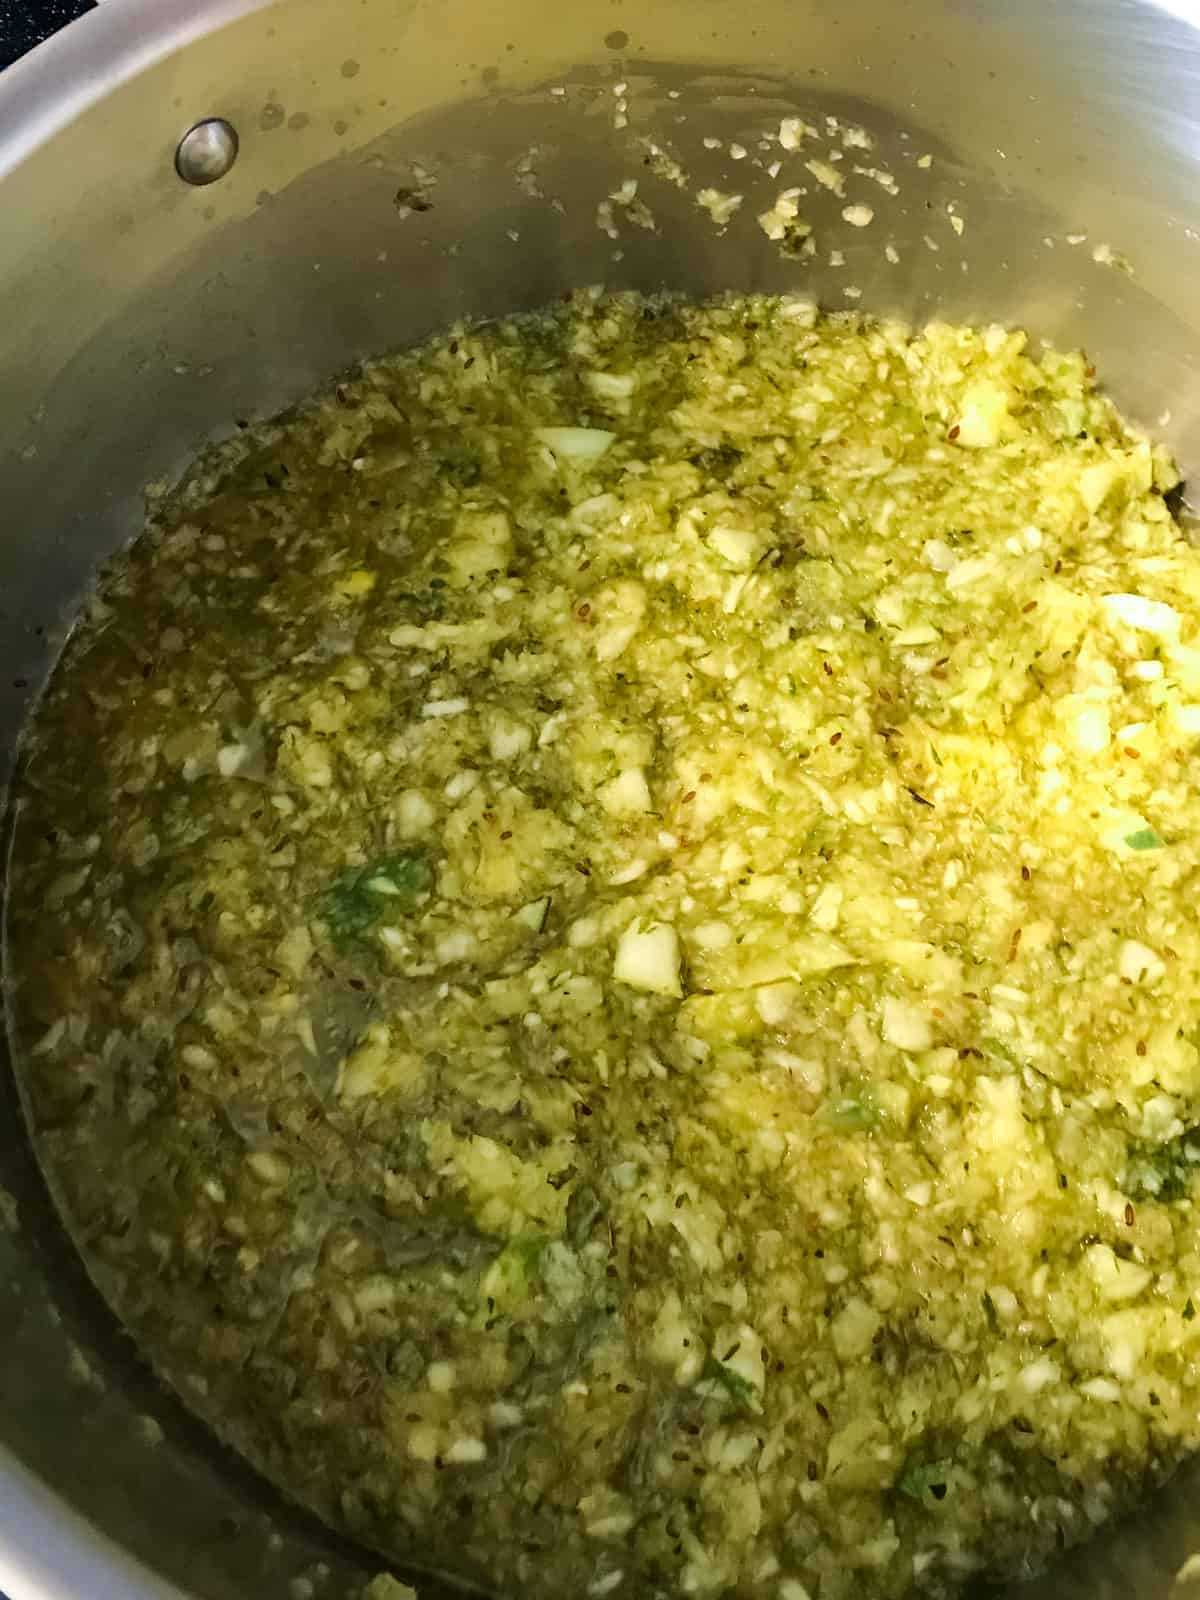 Cooked dill relish.